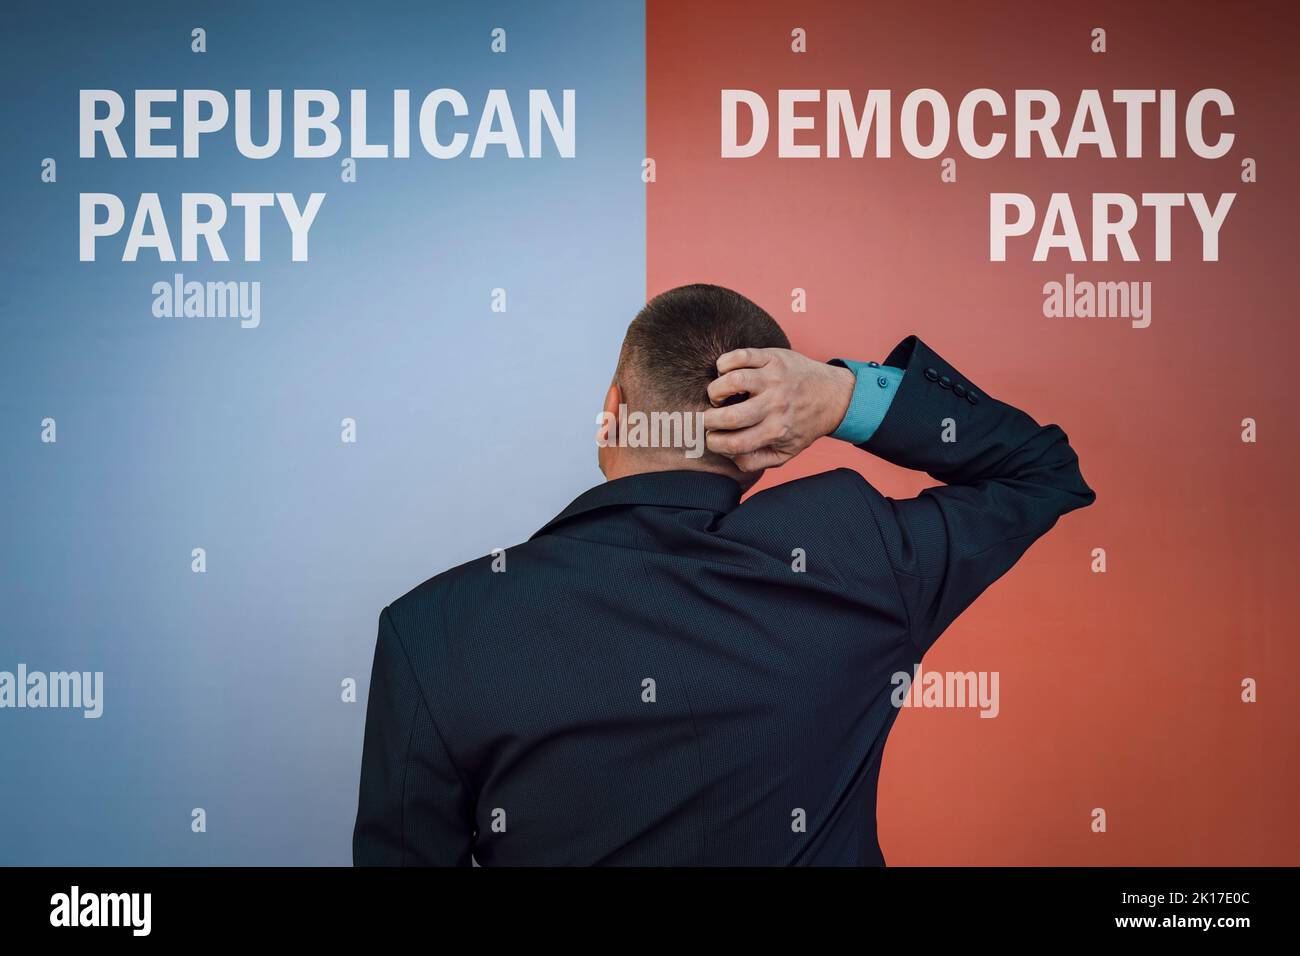 Democrats vs republicans. the concept of choosing a political party or ideology. A male voter to make a choice . Stock Photo